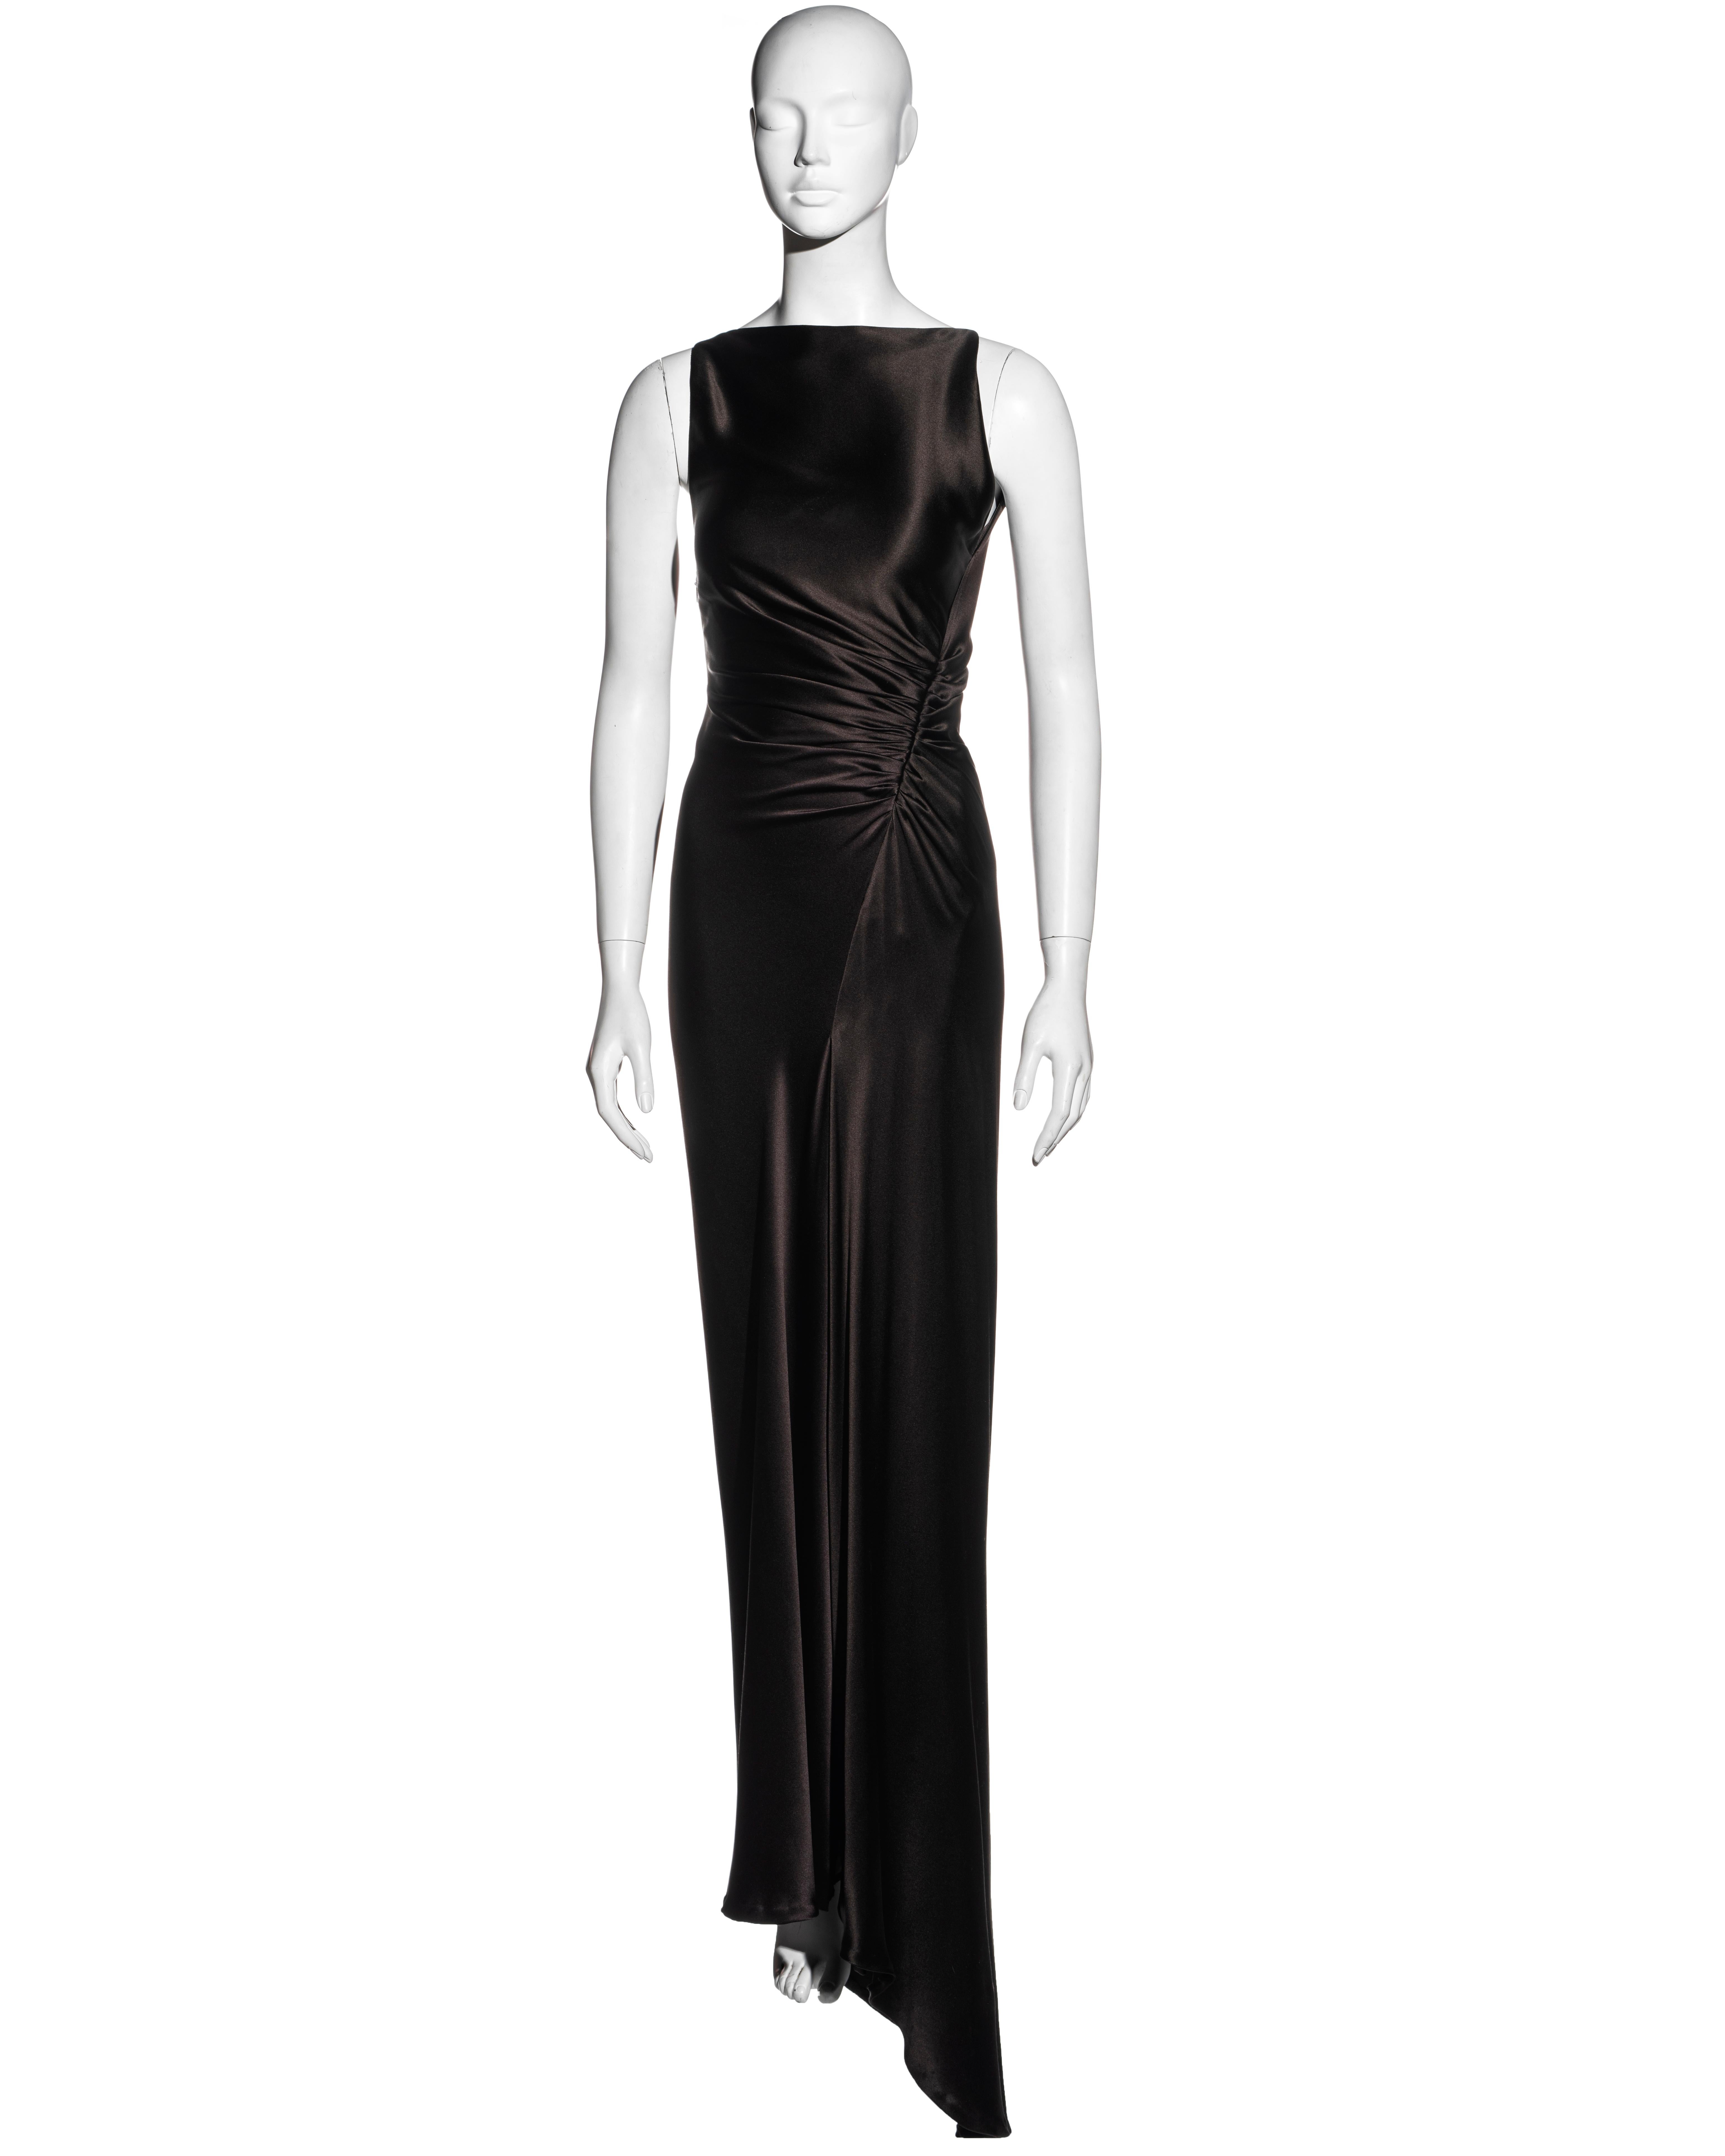 ▪ Gucci deep brown silk evening maxi dress
▪ Designed by Tom Ford 
▪ Sabrina neckline with hook fastenings at the shoulder 
▪ Ruched seam across the bodice 
▪ Leg slit 
▪ Silk chiffon lining 
▪ Trained skirt with dancing loop 
▪ IT 38 - FR 34 - UK